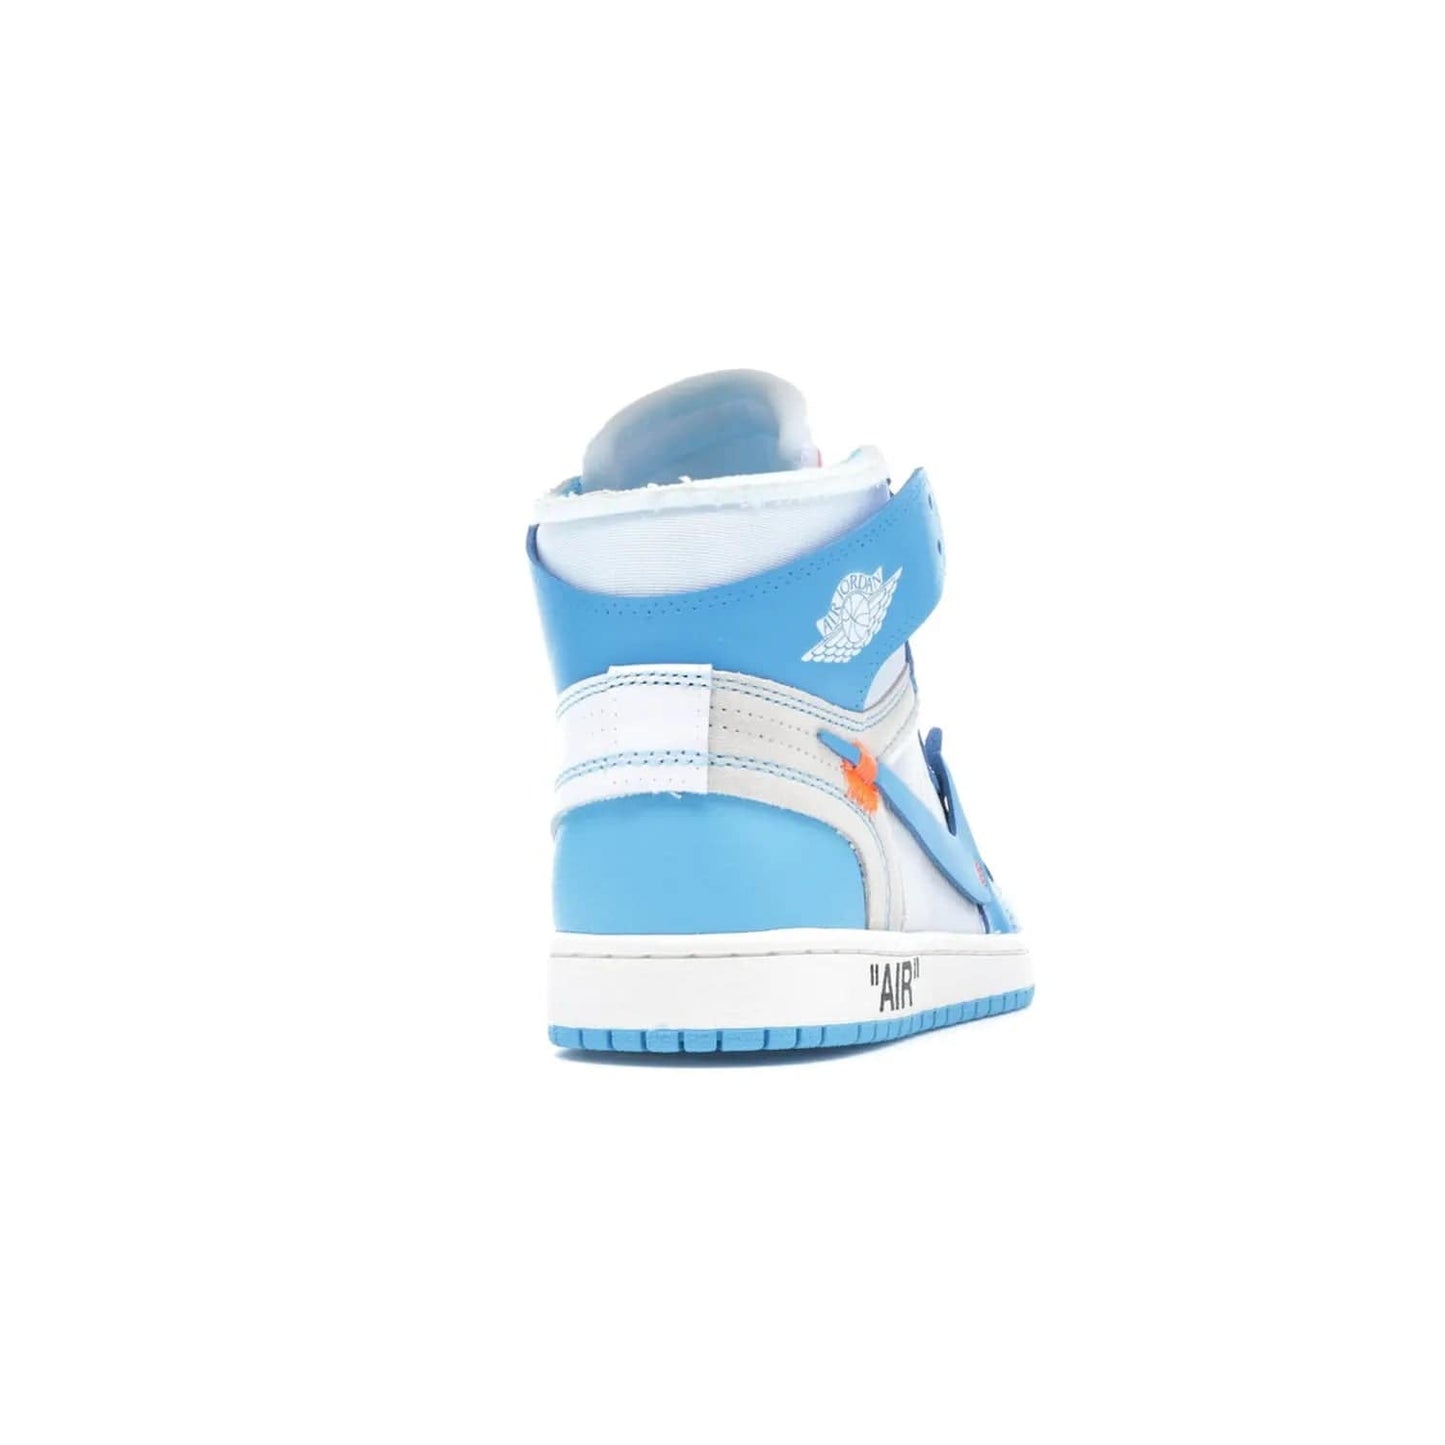 Jordan 1 Retro High Off-White University Blue - Image 30 - Only at www.BallersClubKickz.com - Classic Jordan 1 Retro High "Off-White UNC" sneakers meld style and comfort. Boasting deconstructed white and blue leather, Off-White detailing, and a white, dark powder blue and cone colorway, these sneakers are perfect for dressing up or down. Get the iconic Off-White Jordan 1's and upgrade your look.